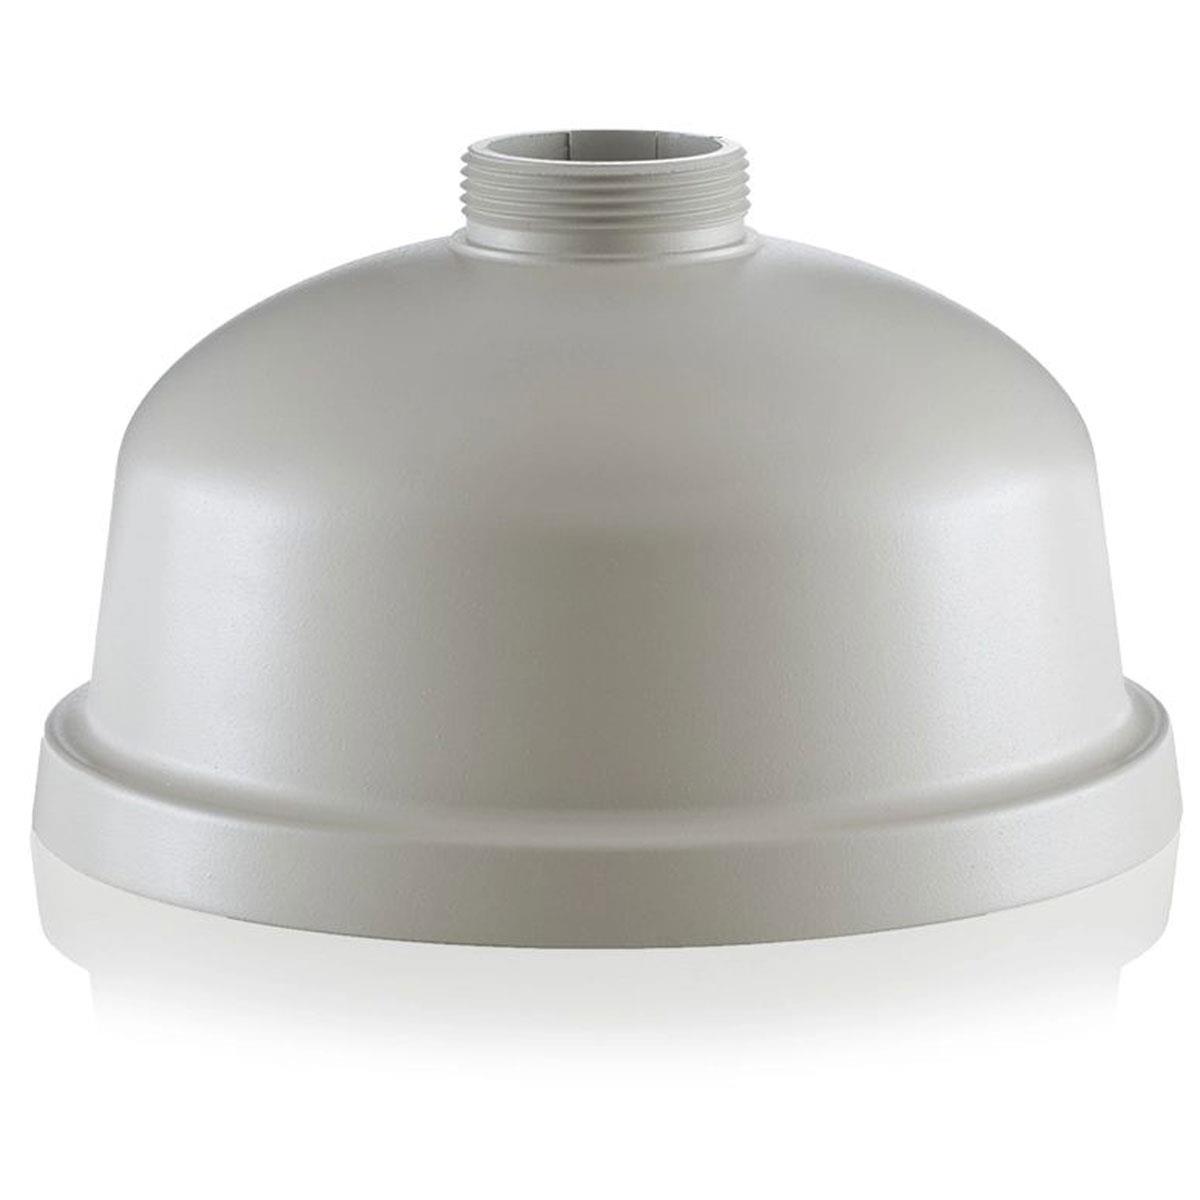 Image of Arecont Vision SV-CAP Standard Mounting Cap